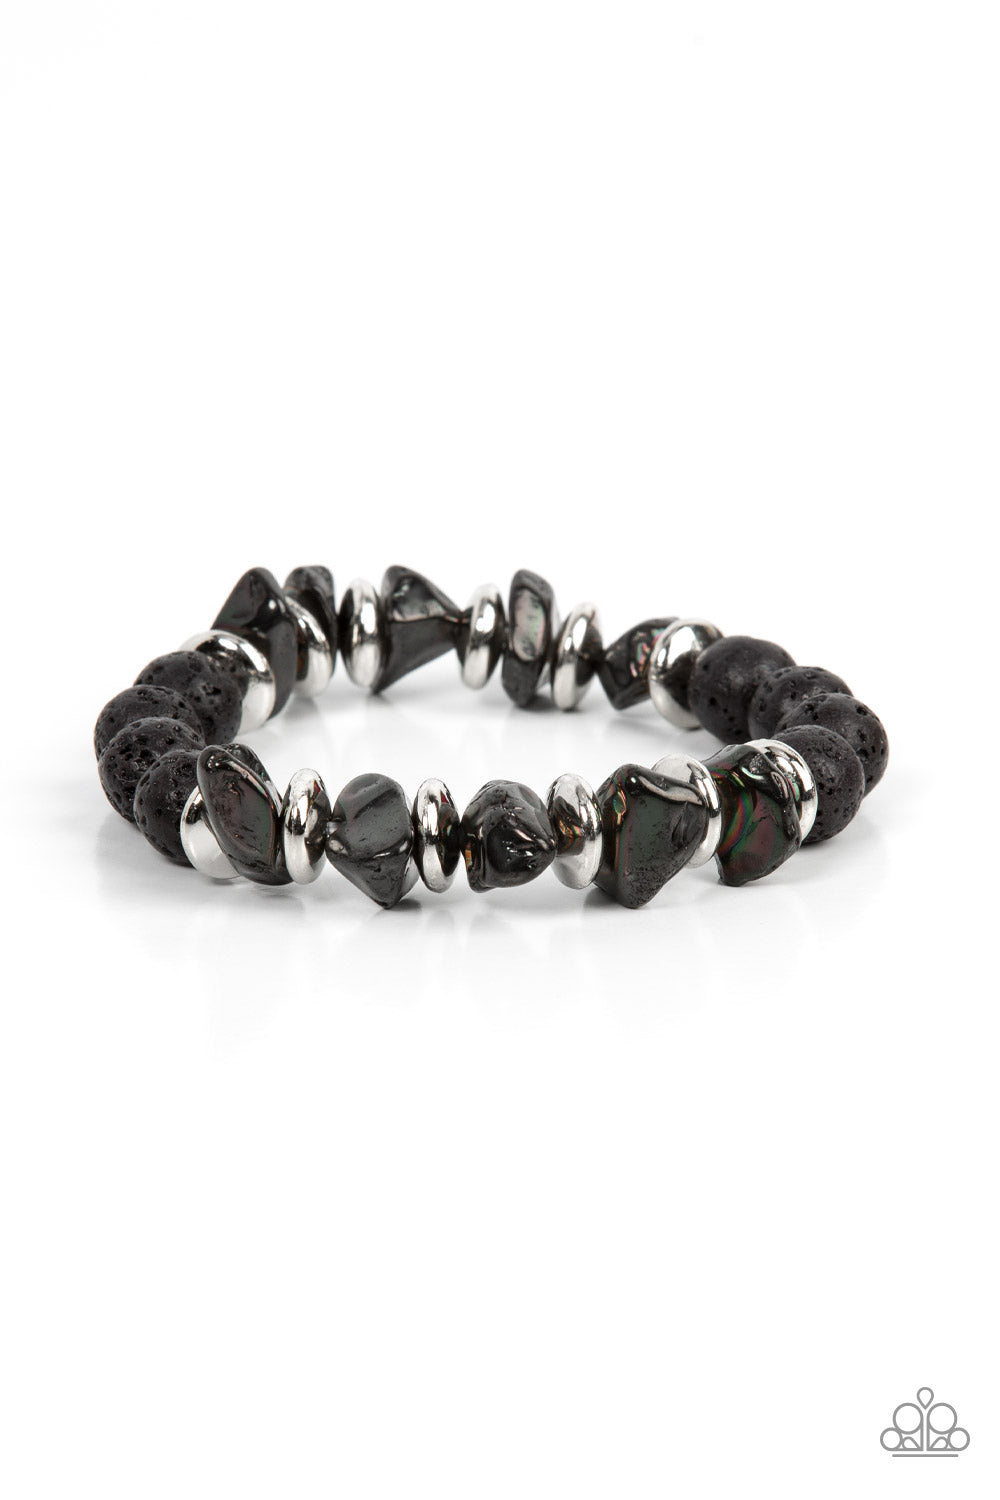 Volcanic Vacay Silver Bracelet - Paparazzi Accessories  An earthy collection of black lava rock beads, dainty silver discs, and black oil spill metallic pebbles are threaded along a stretchy band around the wrist, resulting in an edgy look. Due to its prismatic palette, color may vary.  Sold as one individual bracelet.